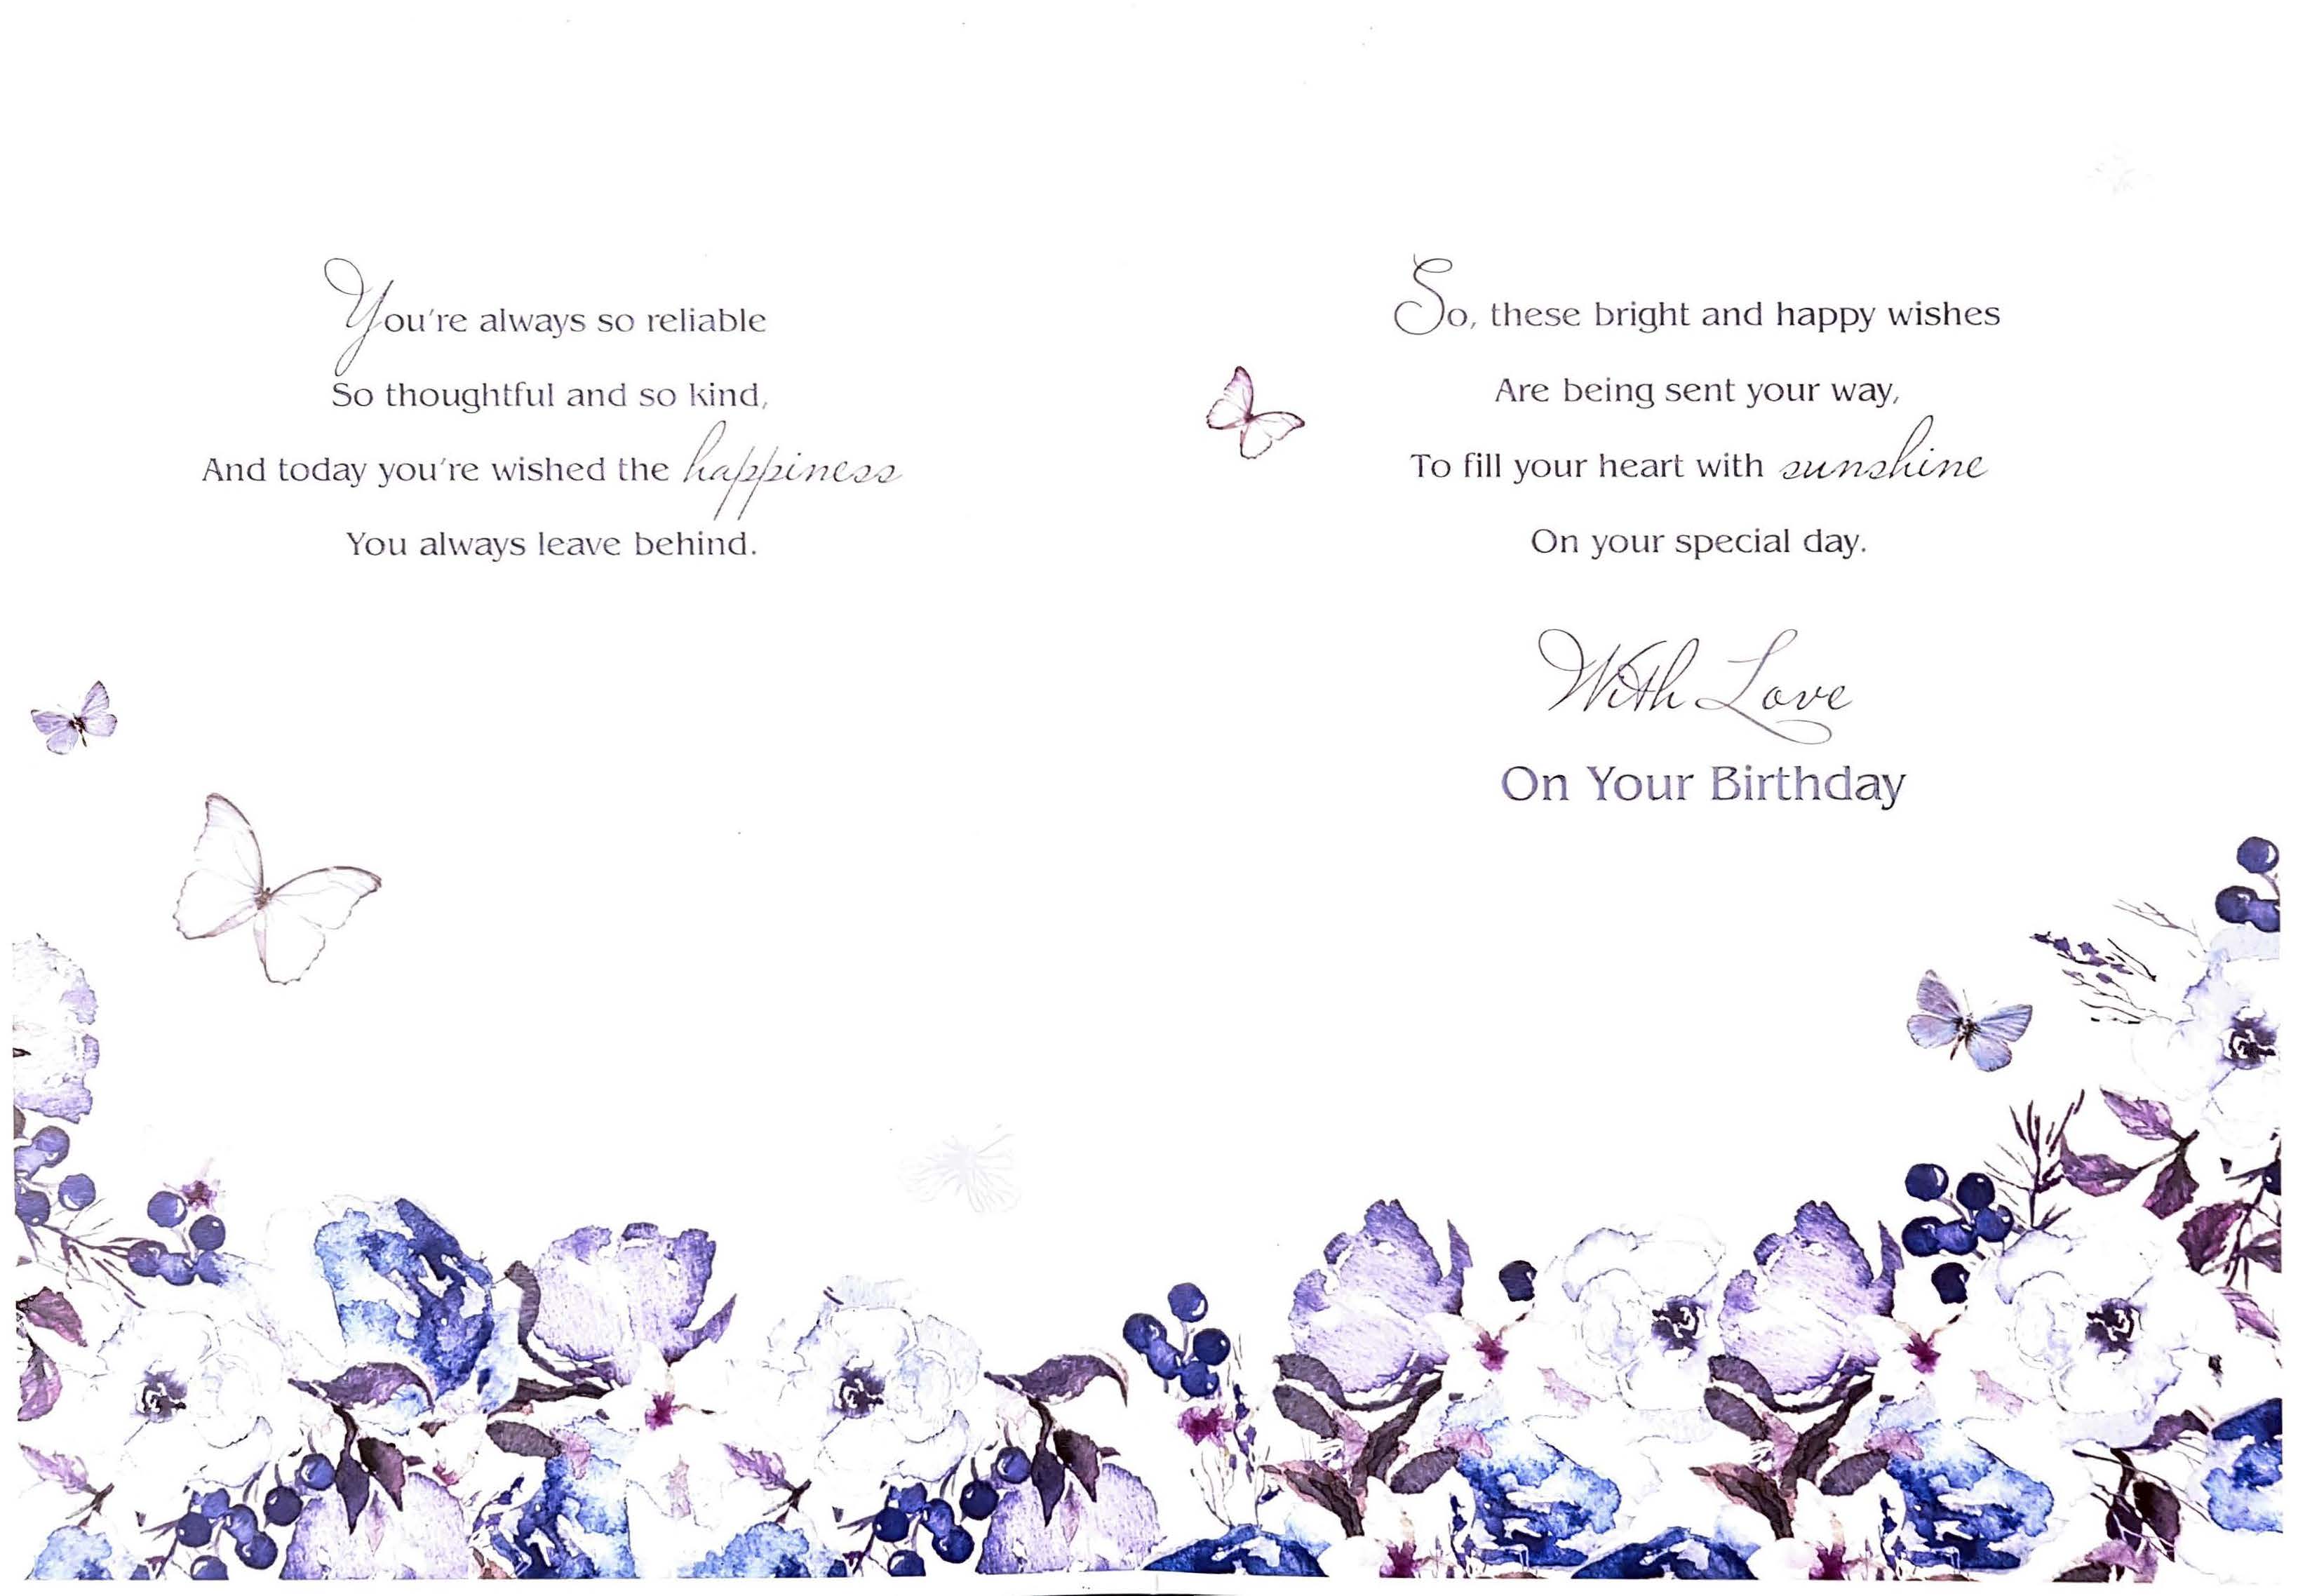 Auntie Birthday Card - Blue Forget Me Nots And Butterflies